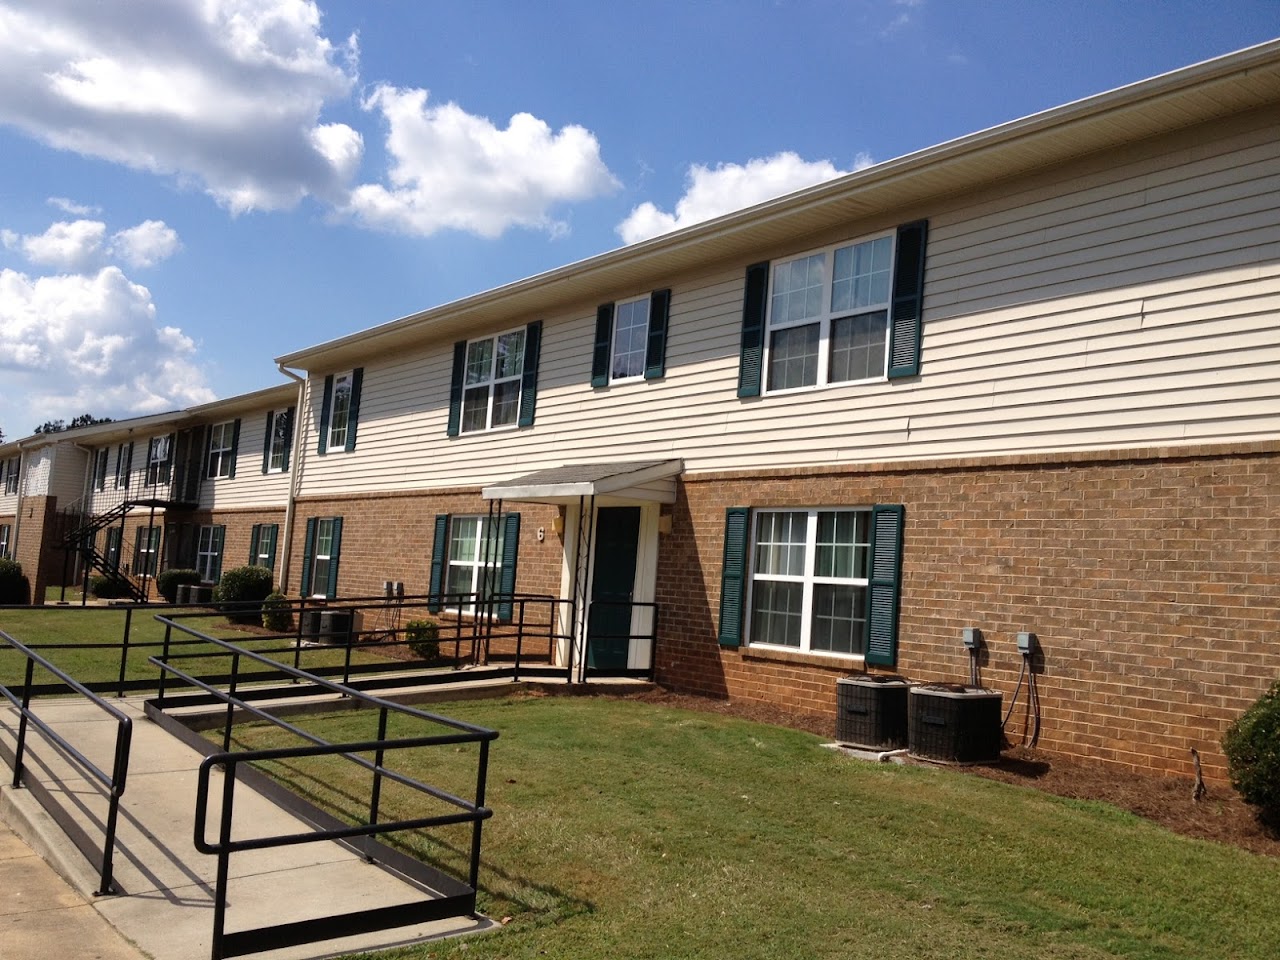 Photo of UNION HILL APARTMENTS. Affordable housing located at 235 UNION HILL DR FORSYTH, GA 31029